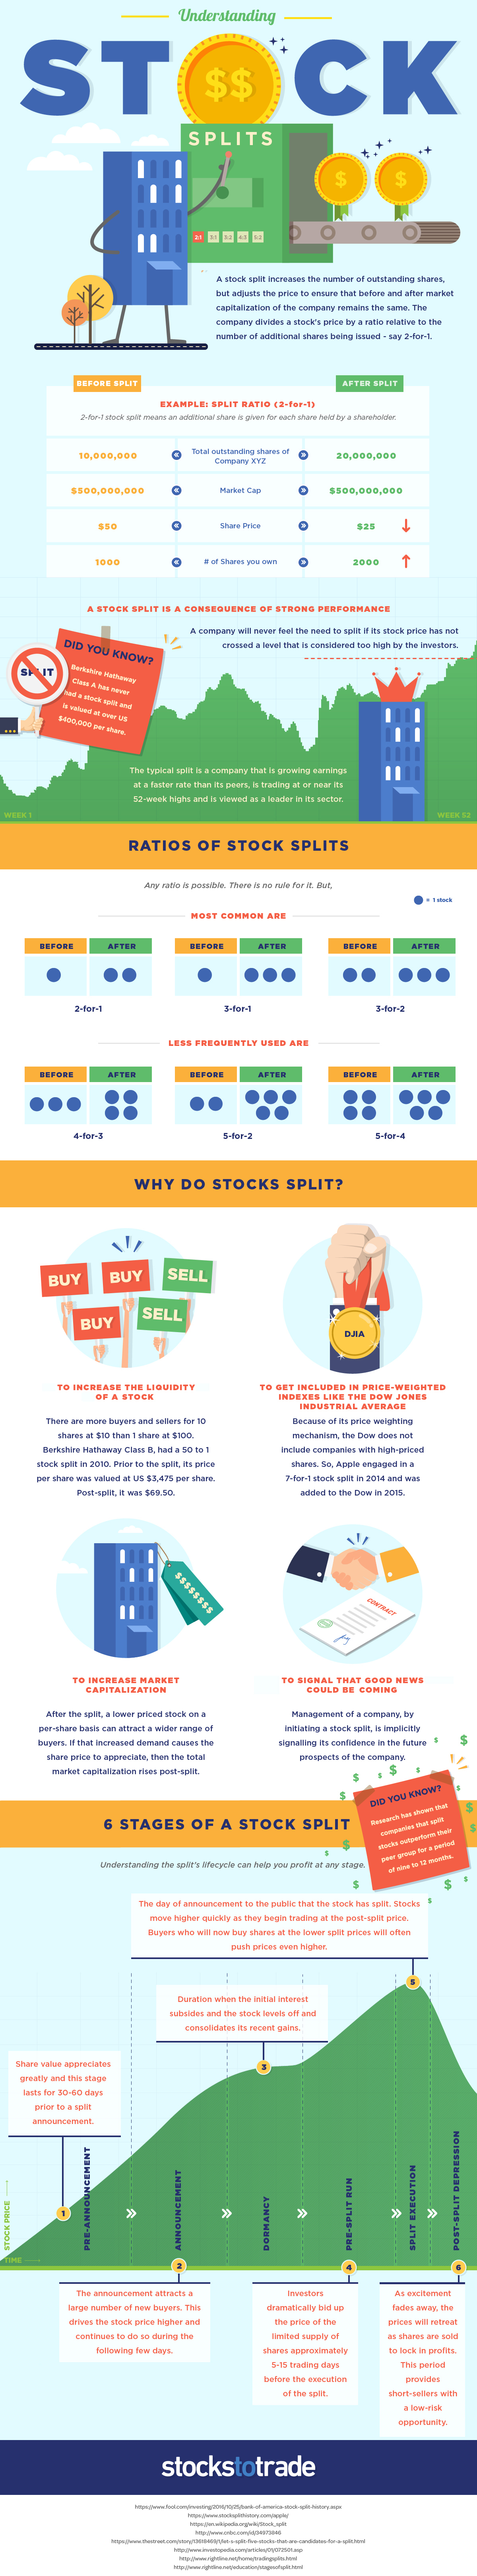 visual guide to stock splits